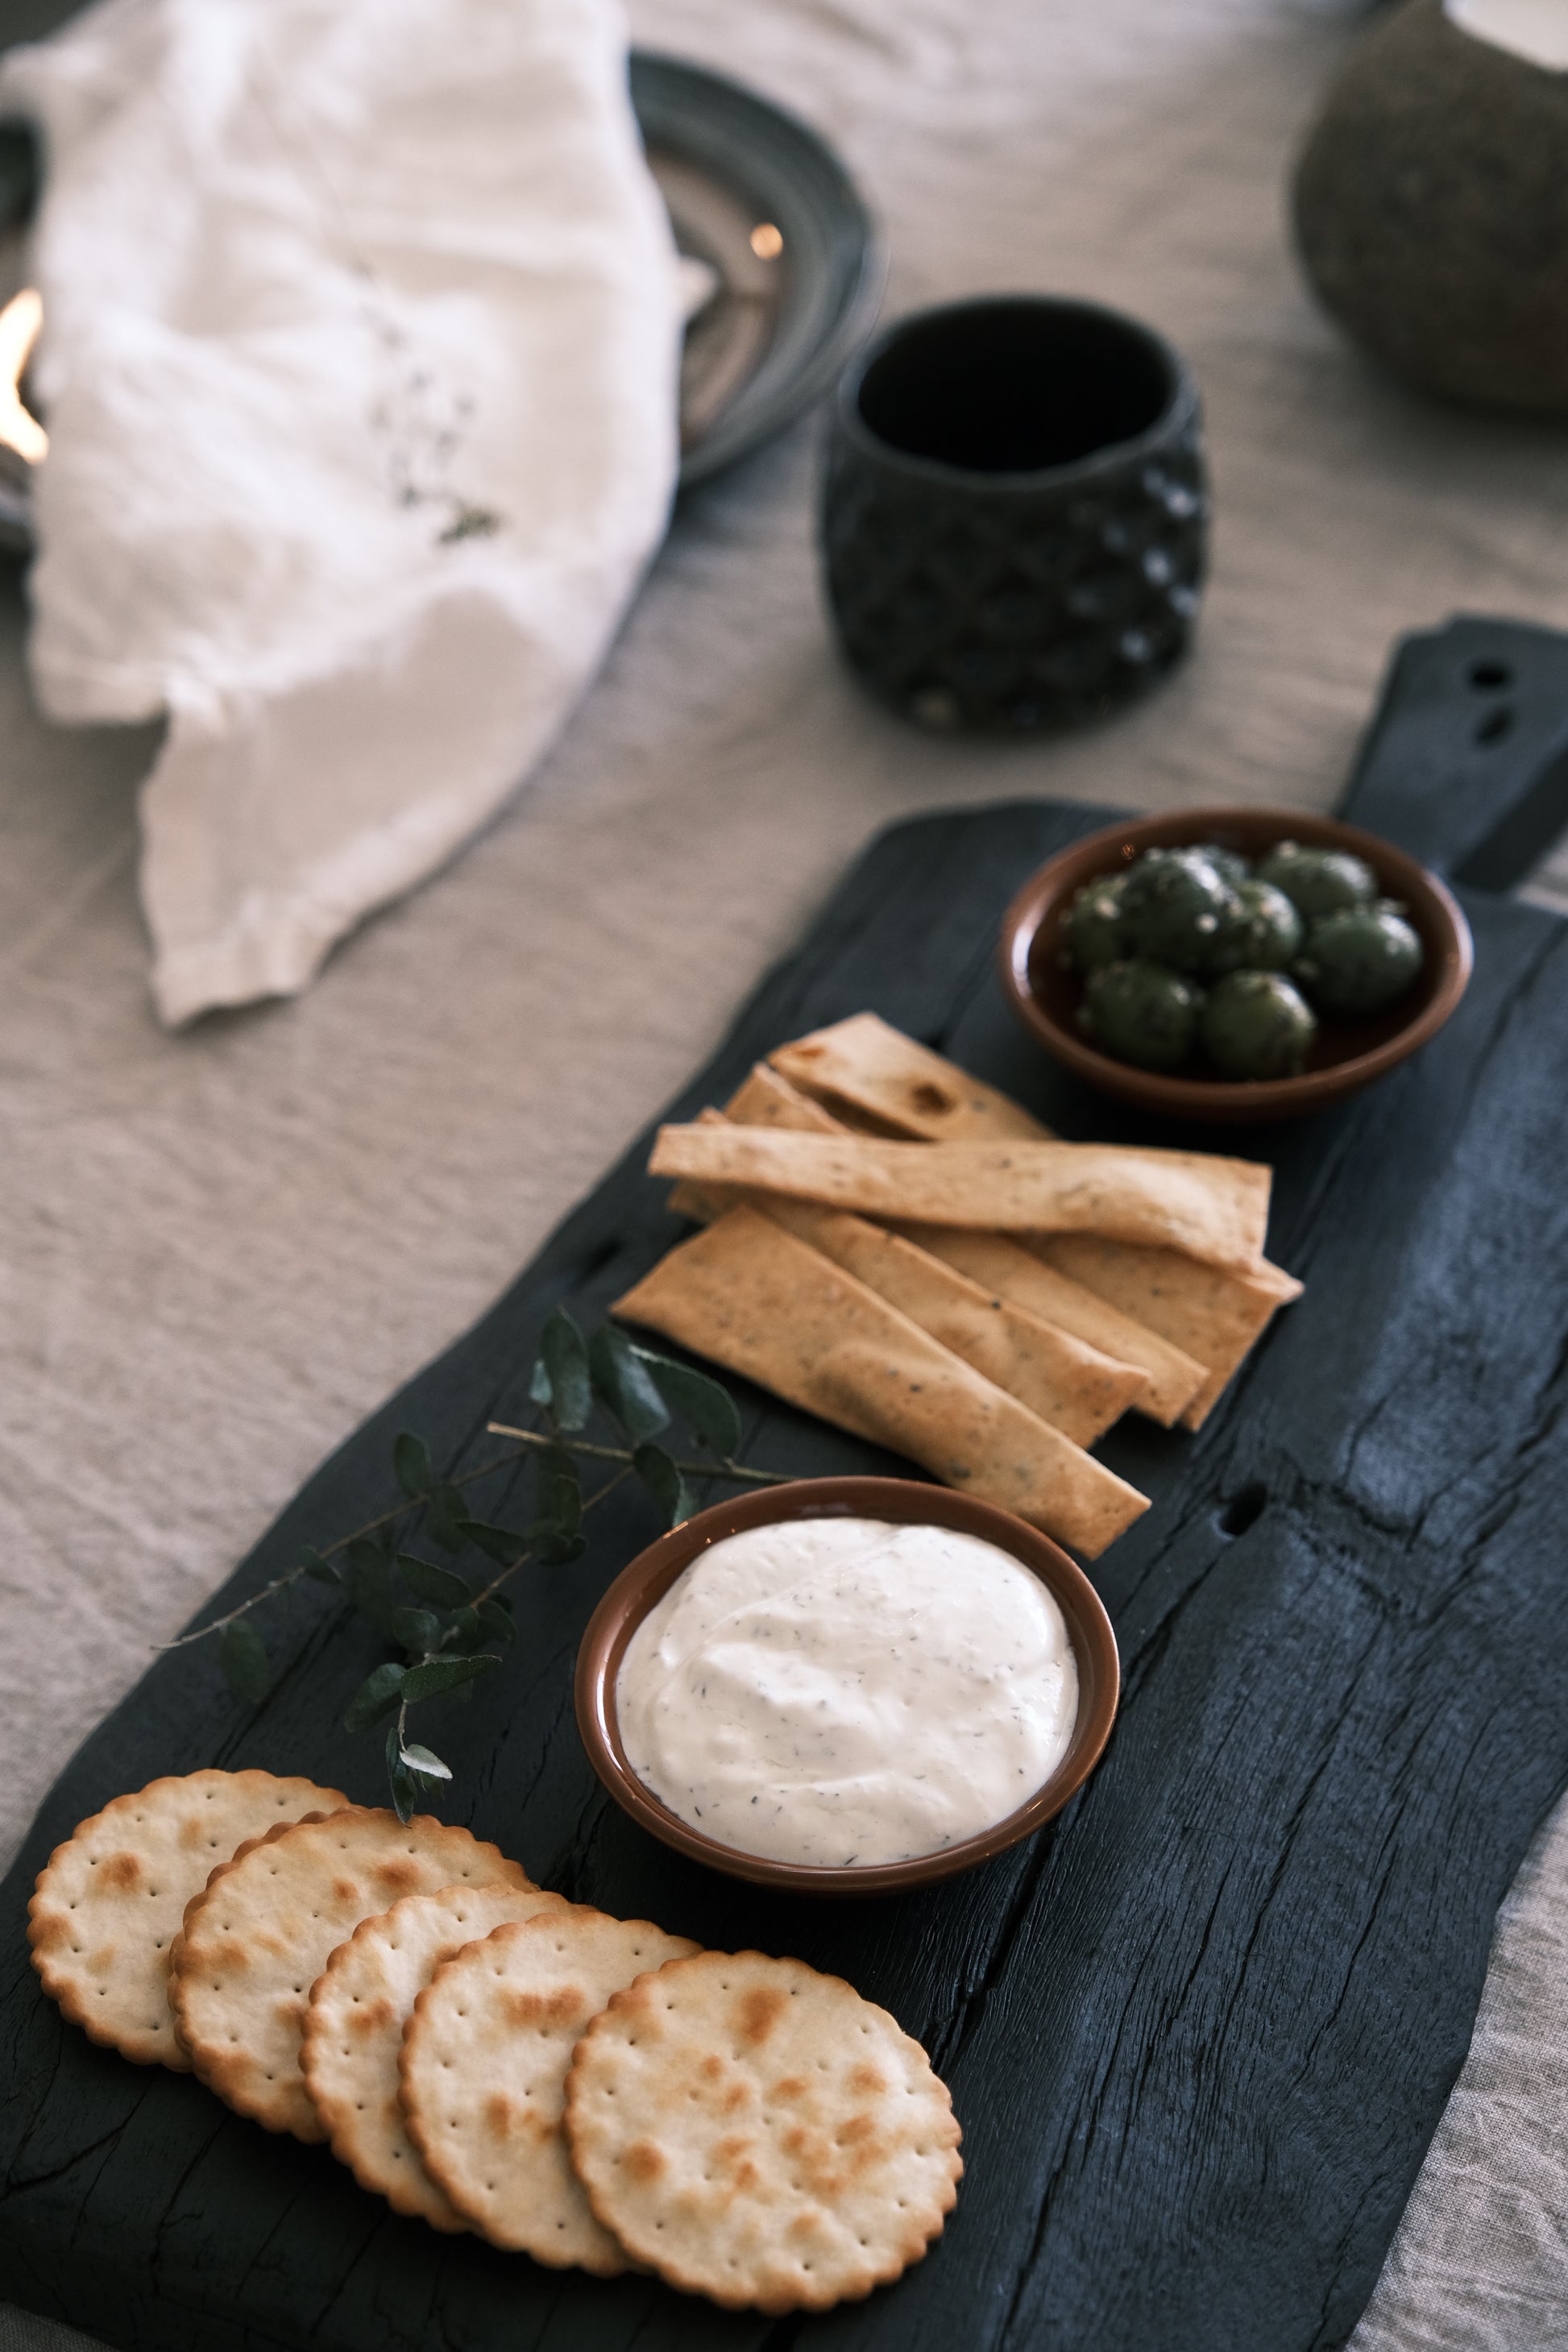 Image of Terra Cruda's MOKU Serving Board from the home dining collection